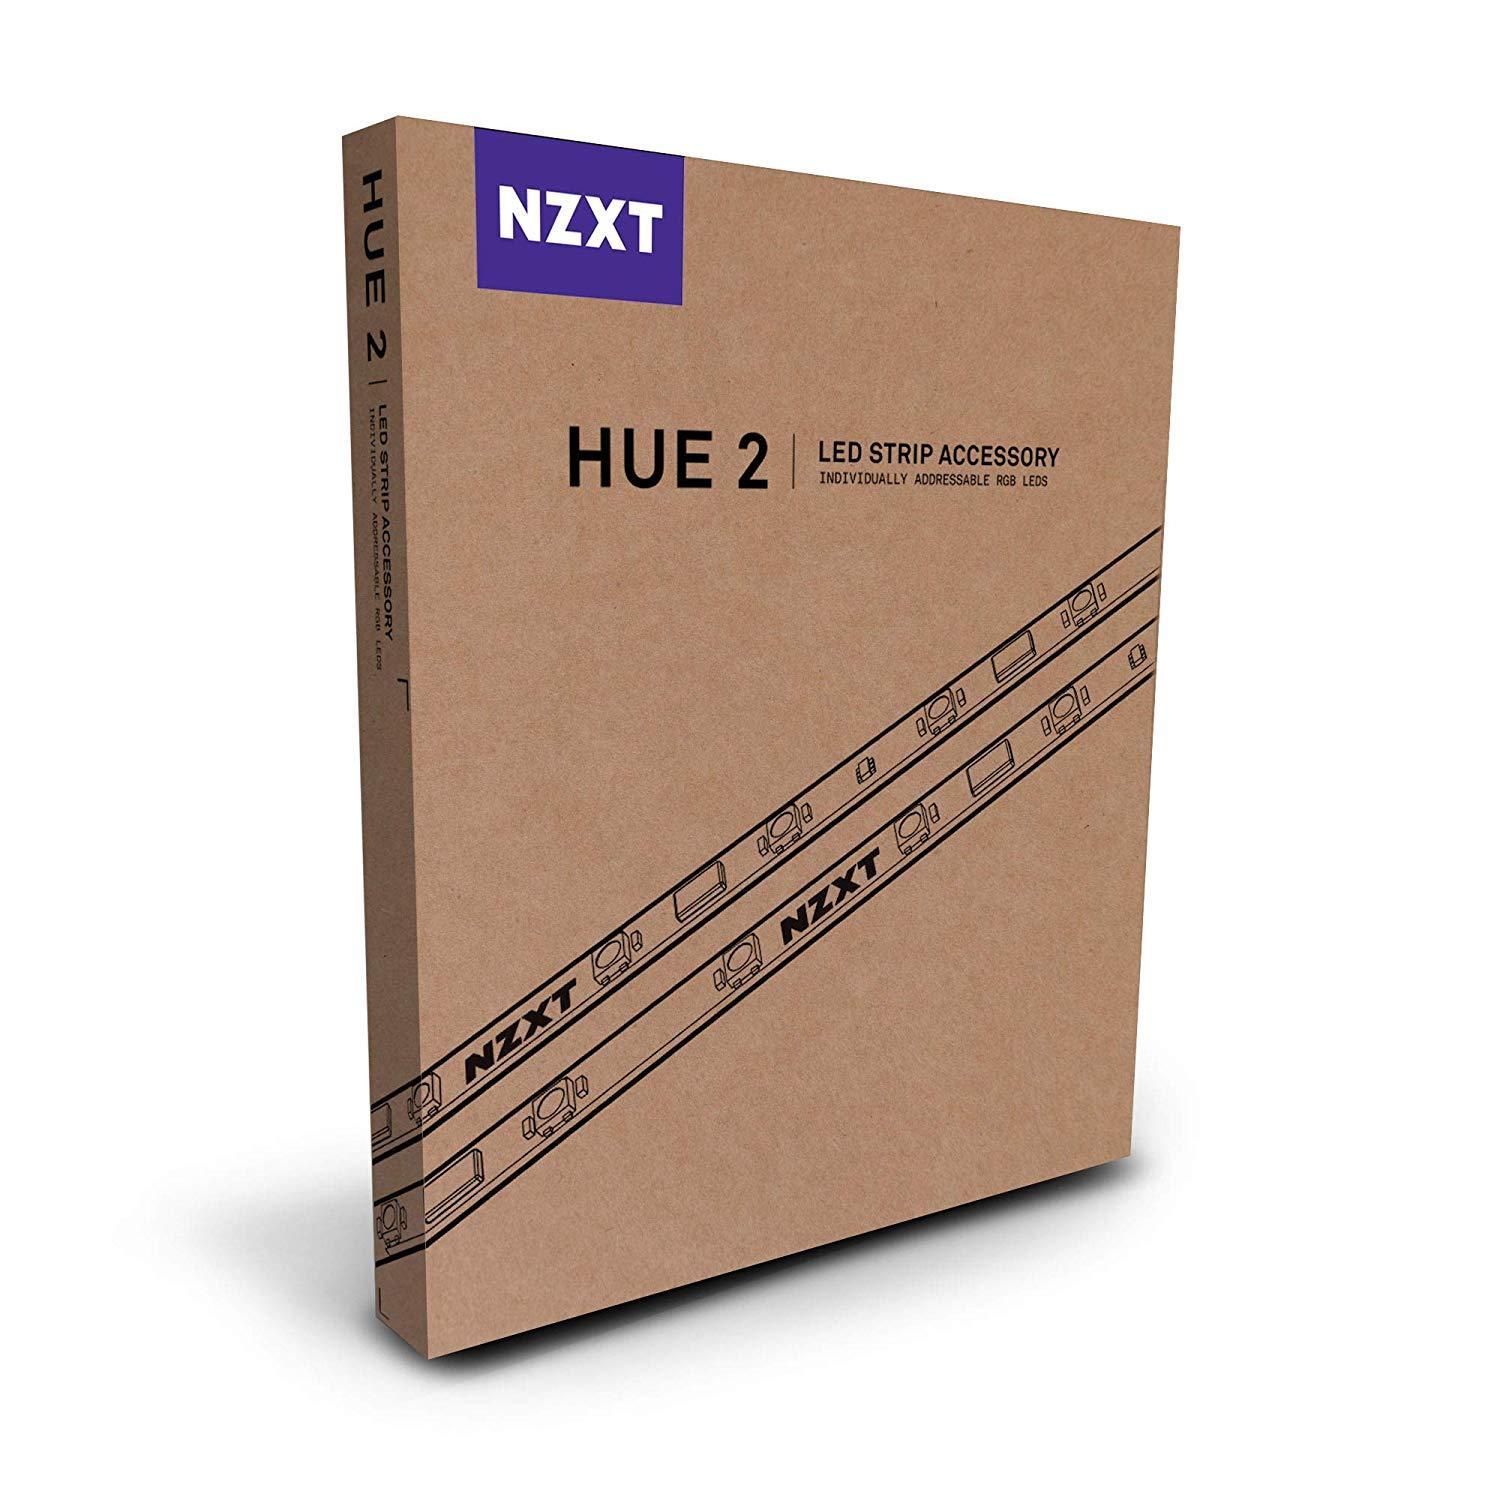 NZXT HUE 2 LED Strip Accessory - Store 974 | ستور ٩٧٤